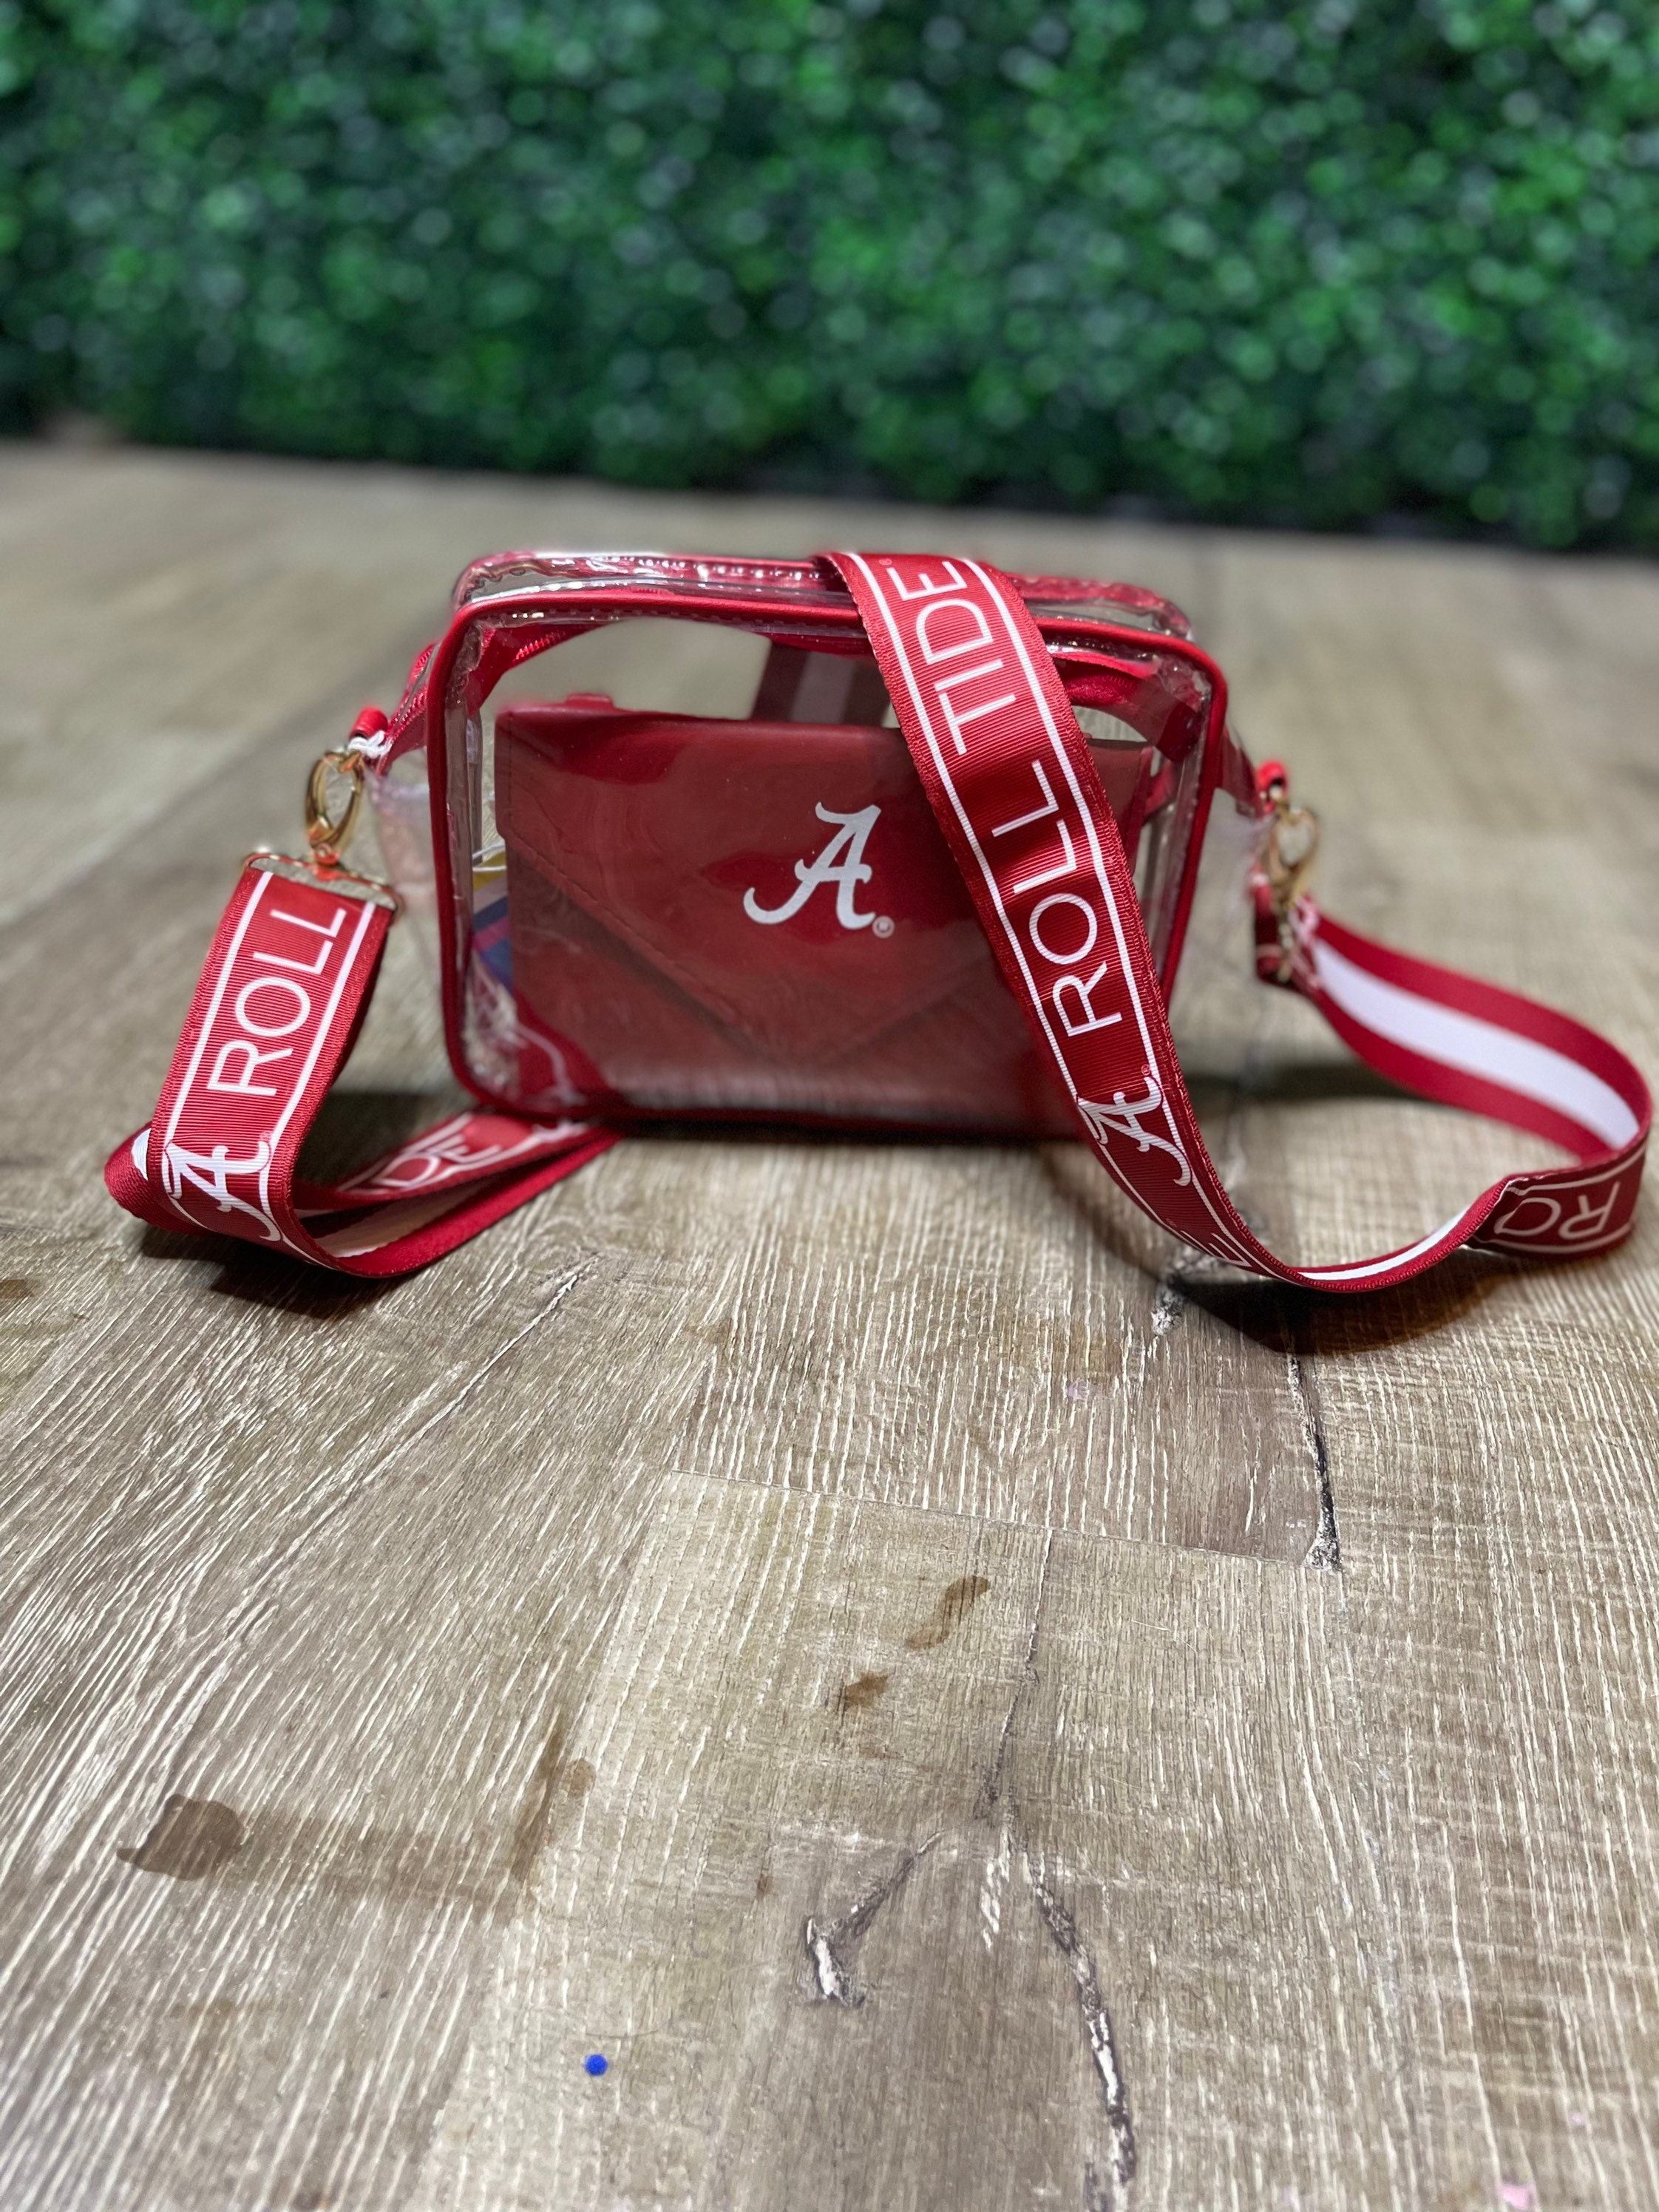 University Clear Purse with Reversible Patterned Shoulder Straps